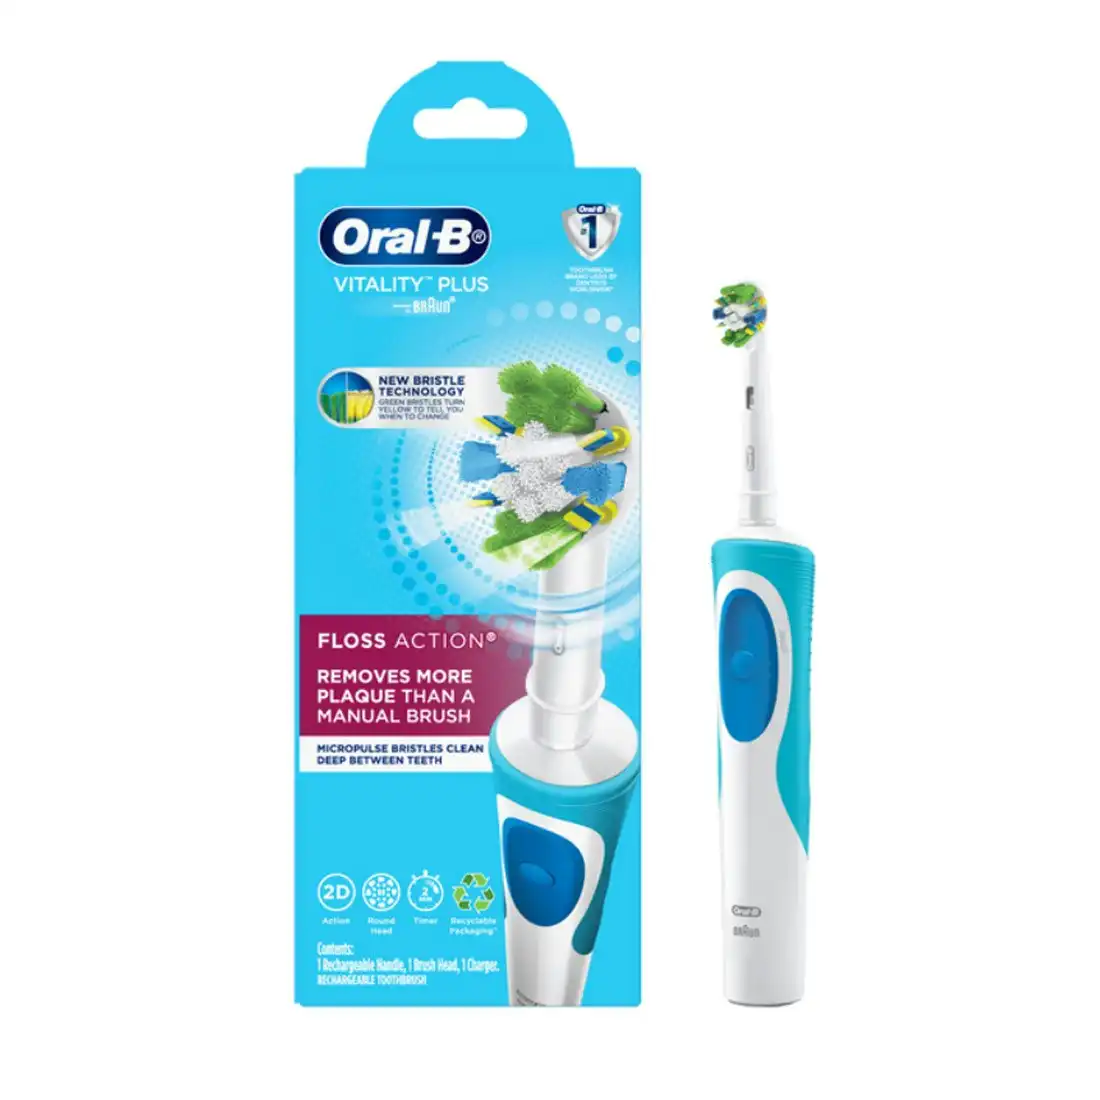 Oral-B Vitality Plus FlossAction Electric Toothbrush - Blue